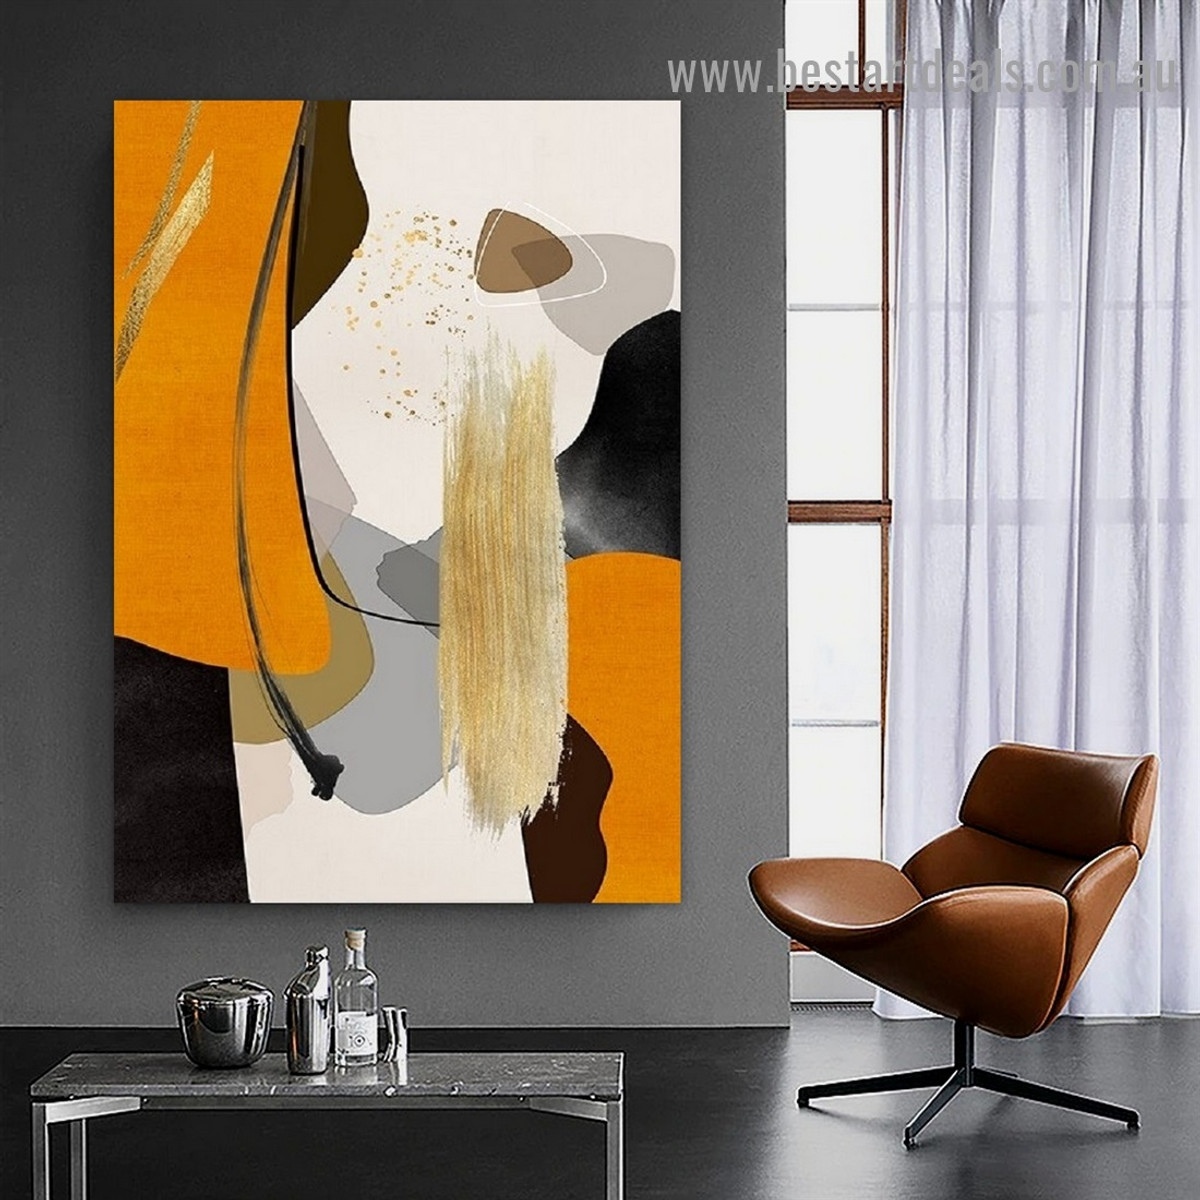 Flaw and Line Abstract Modern Framed Portrait Image Canvas Print for Room Wall Ornament